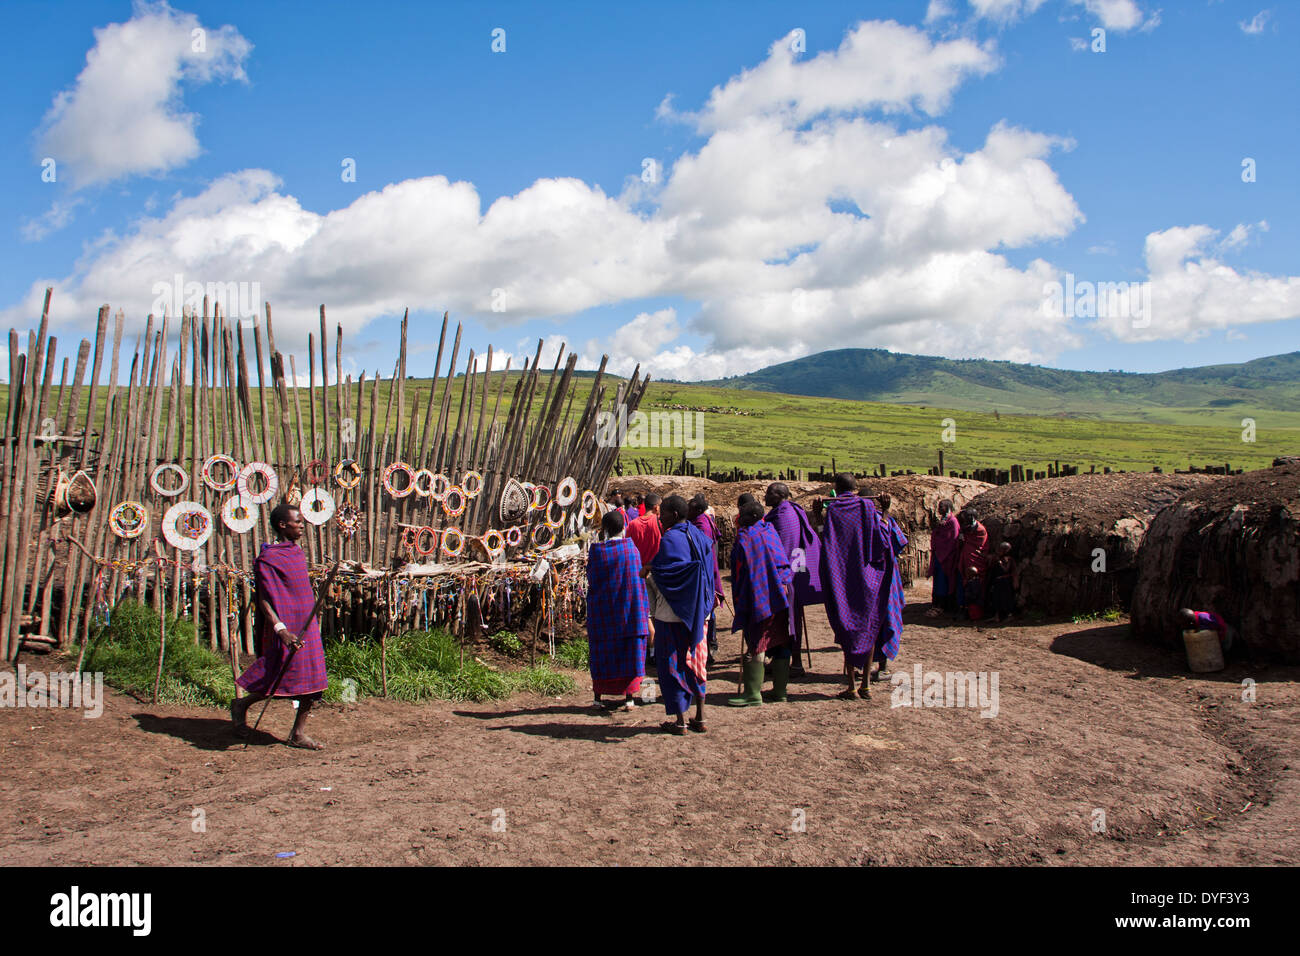 A group of Maasai men in the village. Photographed in Kenya Stock Photo